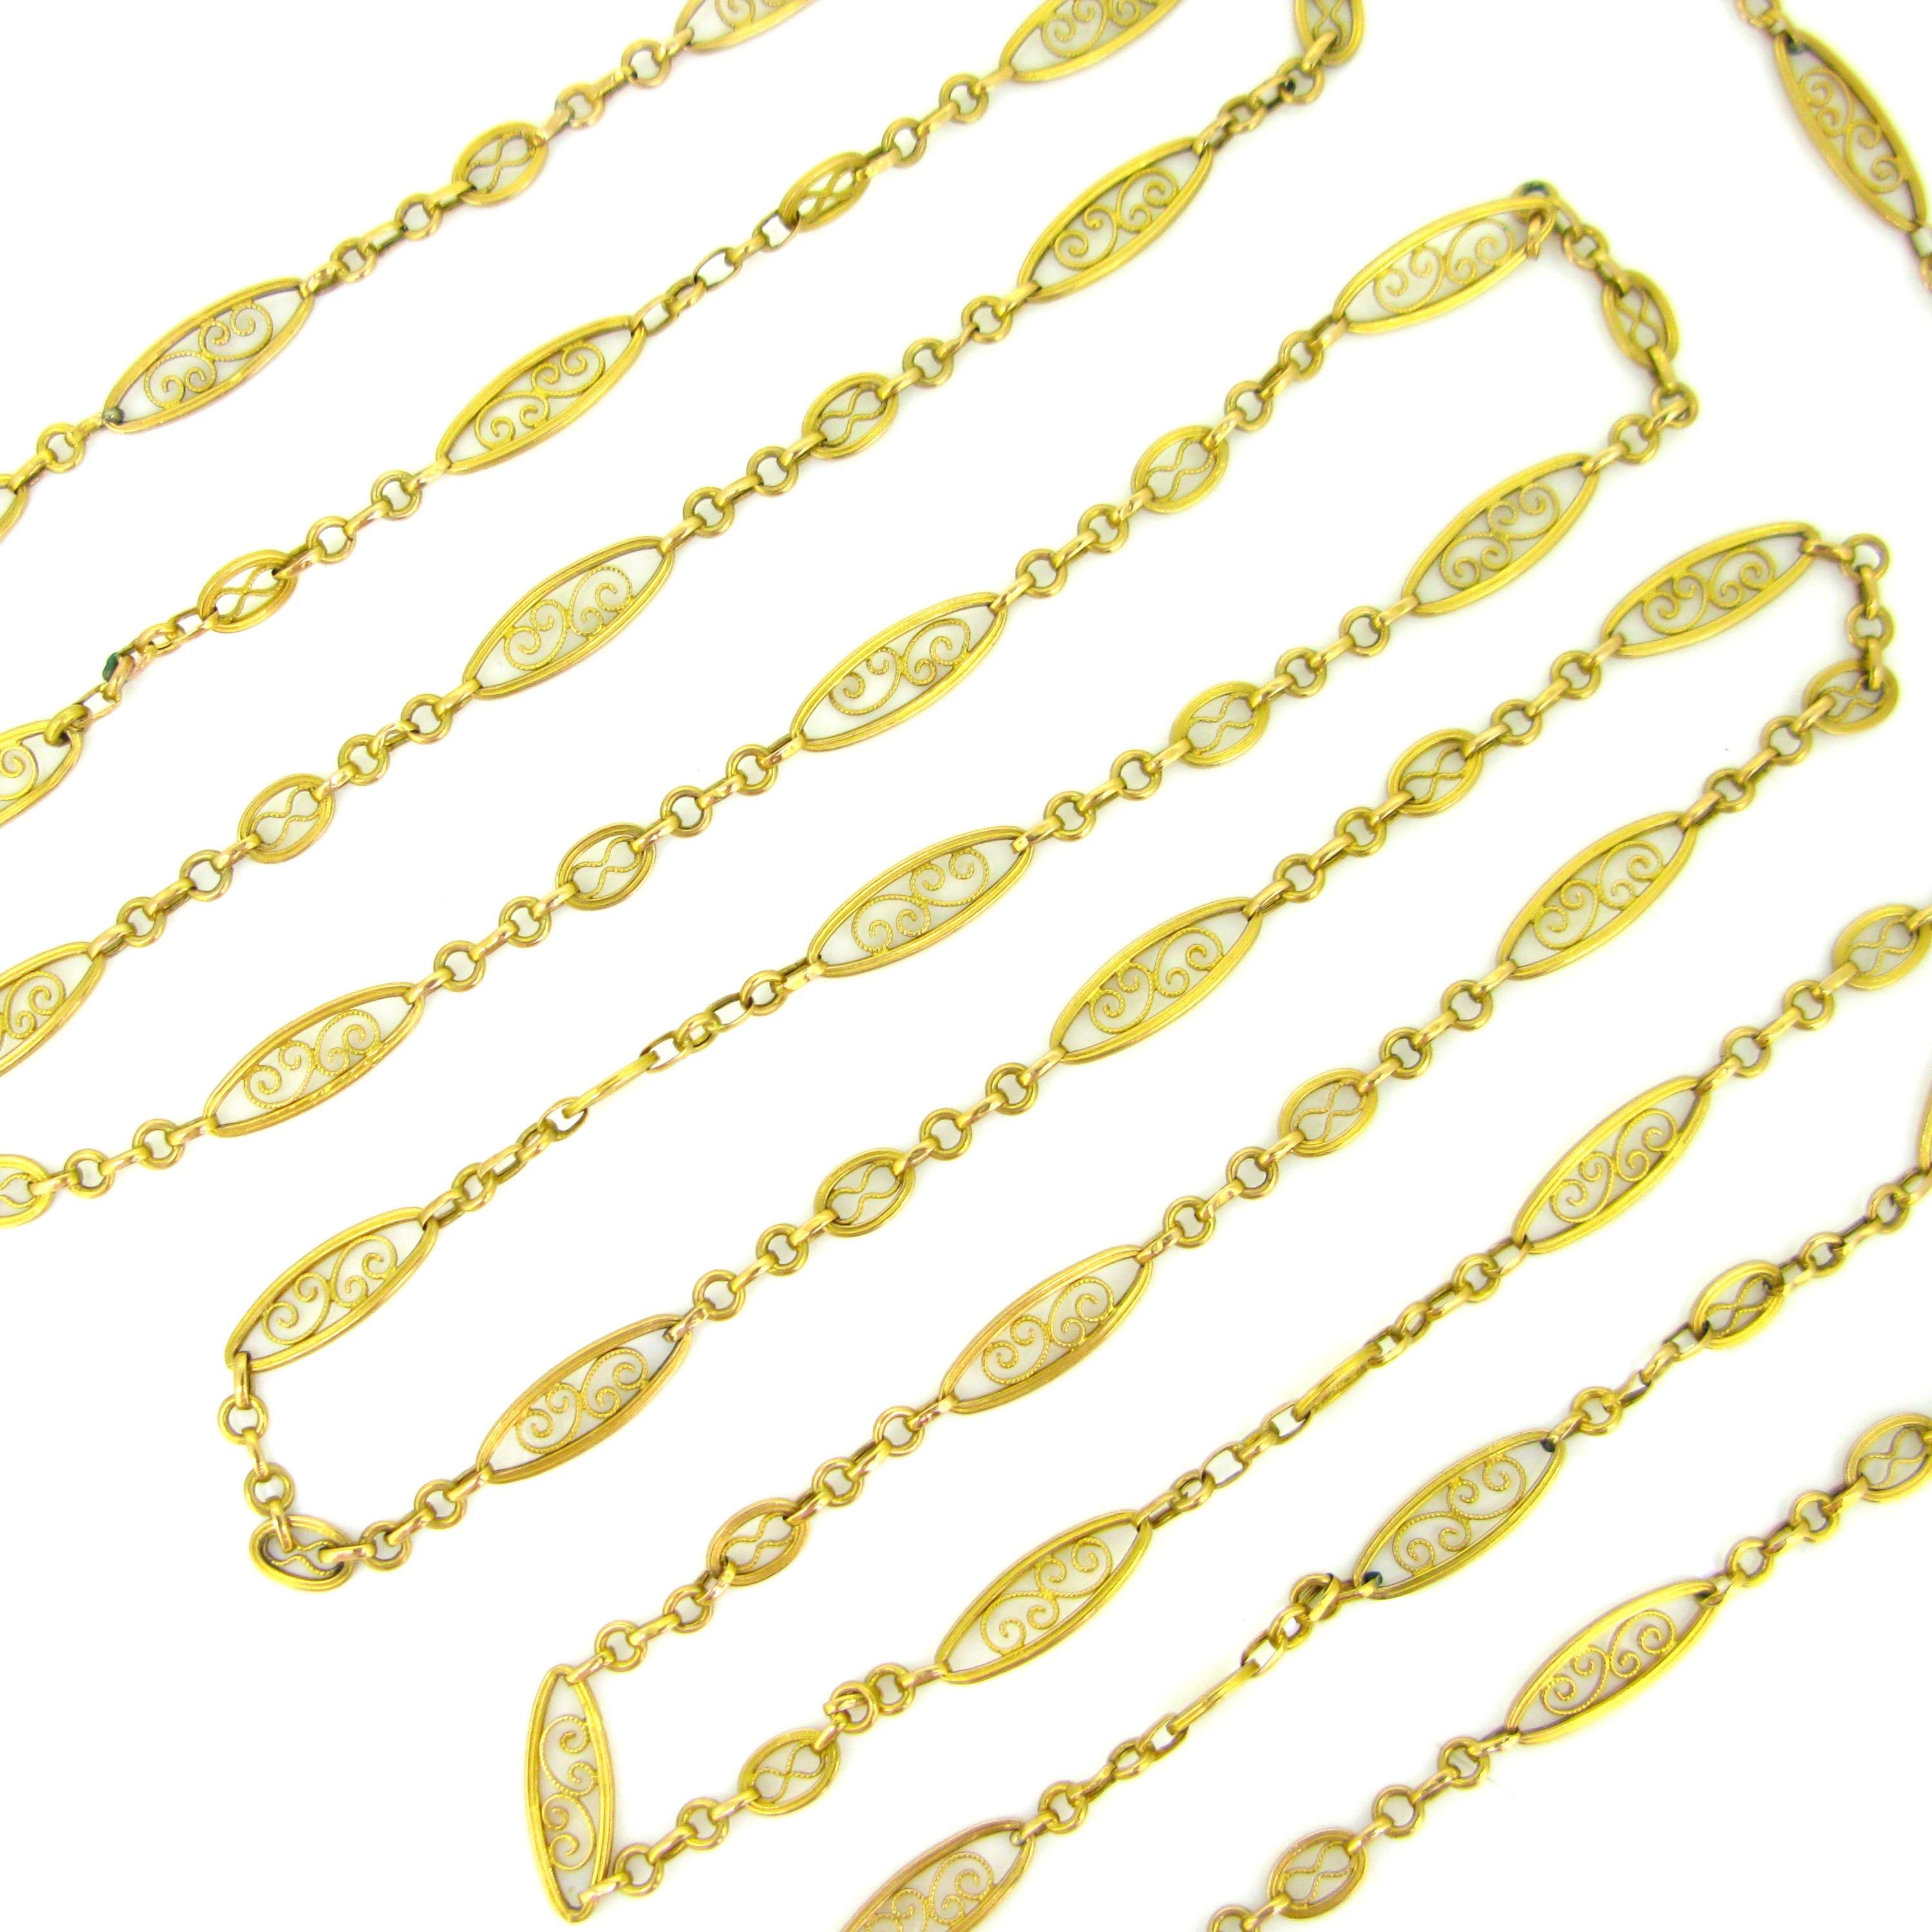 Weight: 23,08gr

Metal: 18kt yellow gold

Hallmarks: French, eagle’s head

Condition: Very good

Comments: This long chain is from the late Victorian period, circa 1880. It is made in 18k yellow gold since it is marked with the French eagle’s head.